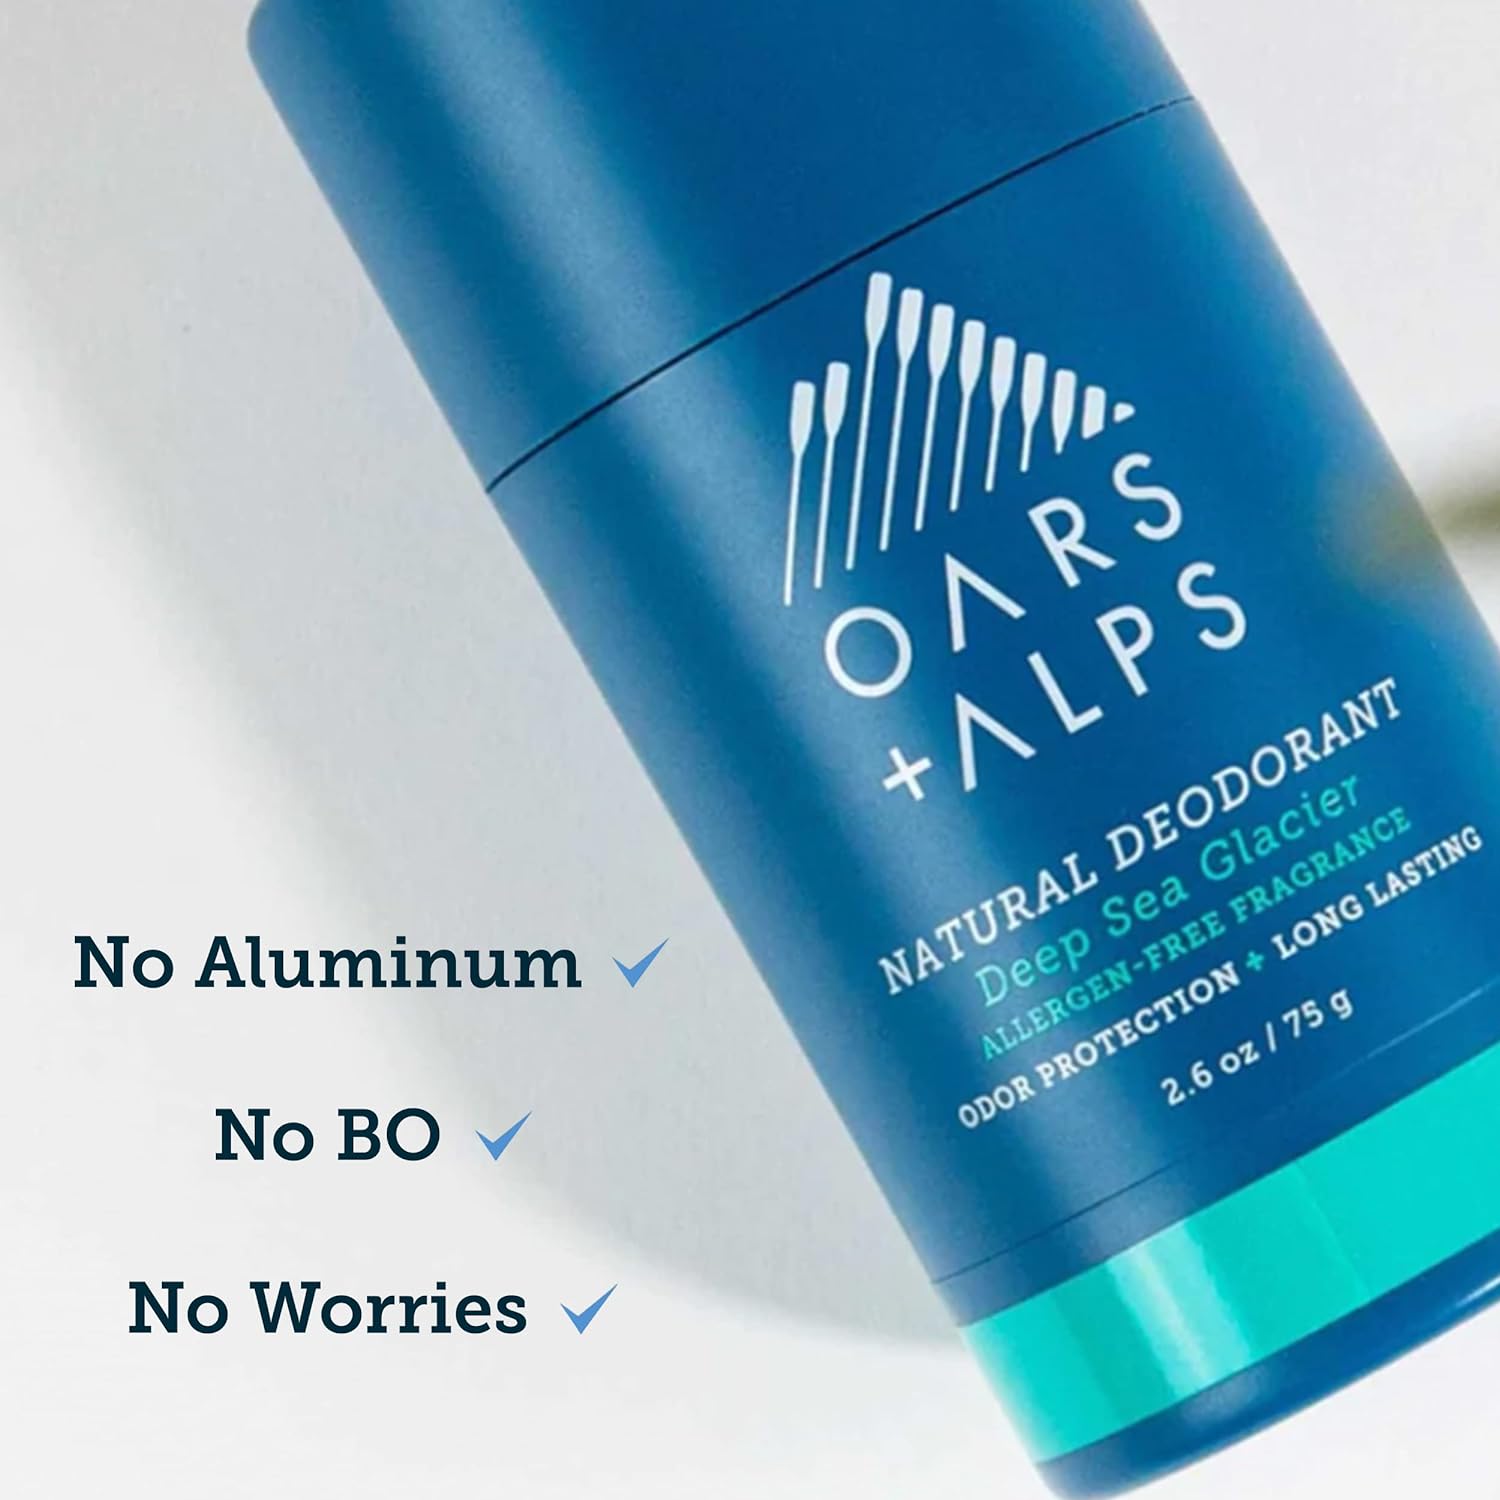 Oars + Alps Aluminum Free Deodorant for Men and Women, Dermatologist Tested, Travel Size, Deep Sea Glacier, 3 Pack, 2.6 Oz Each : Beauty & Personal Care